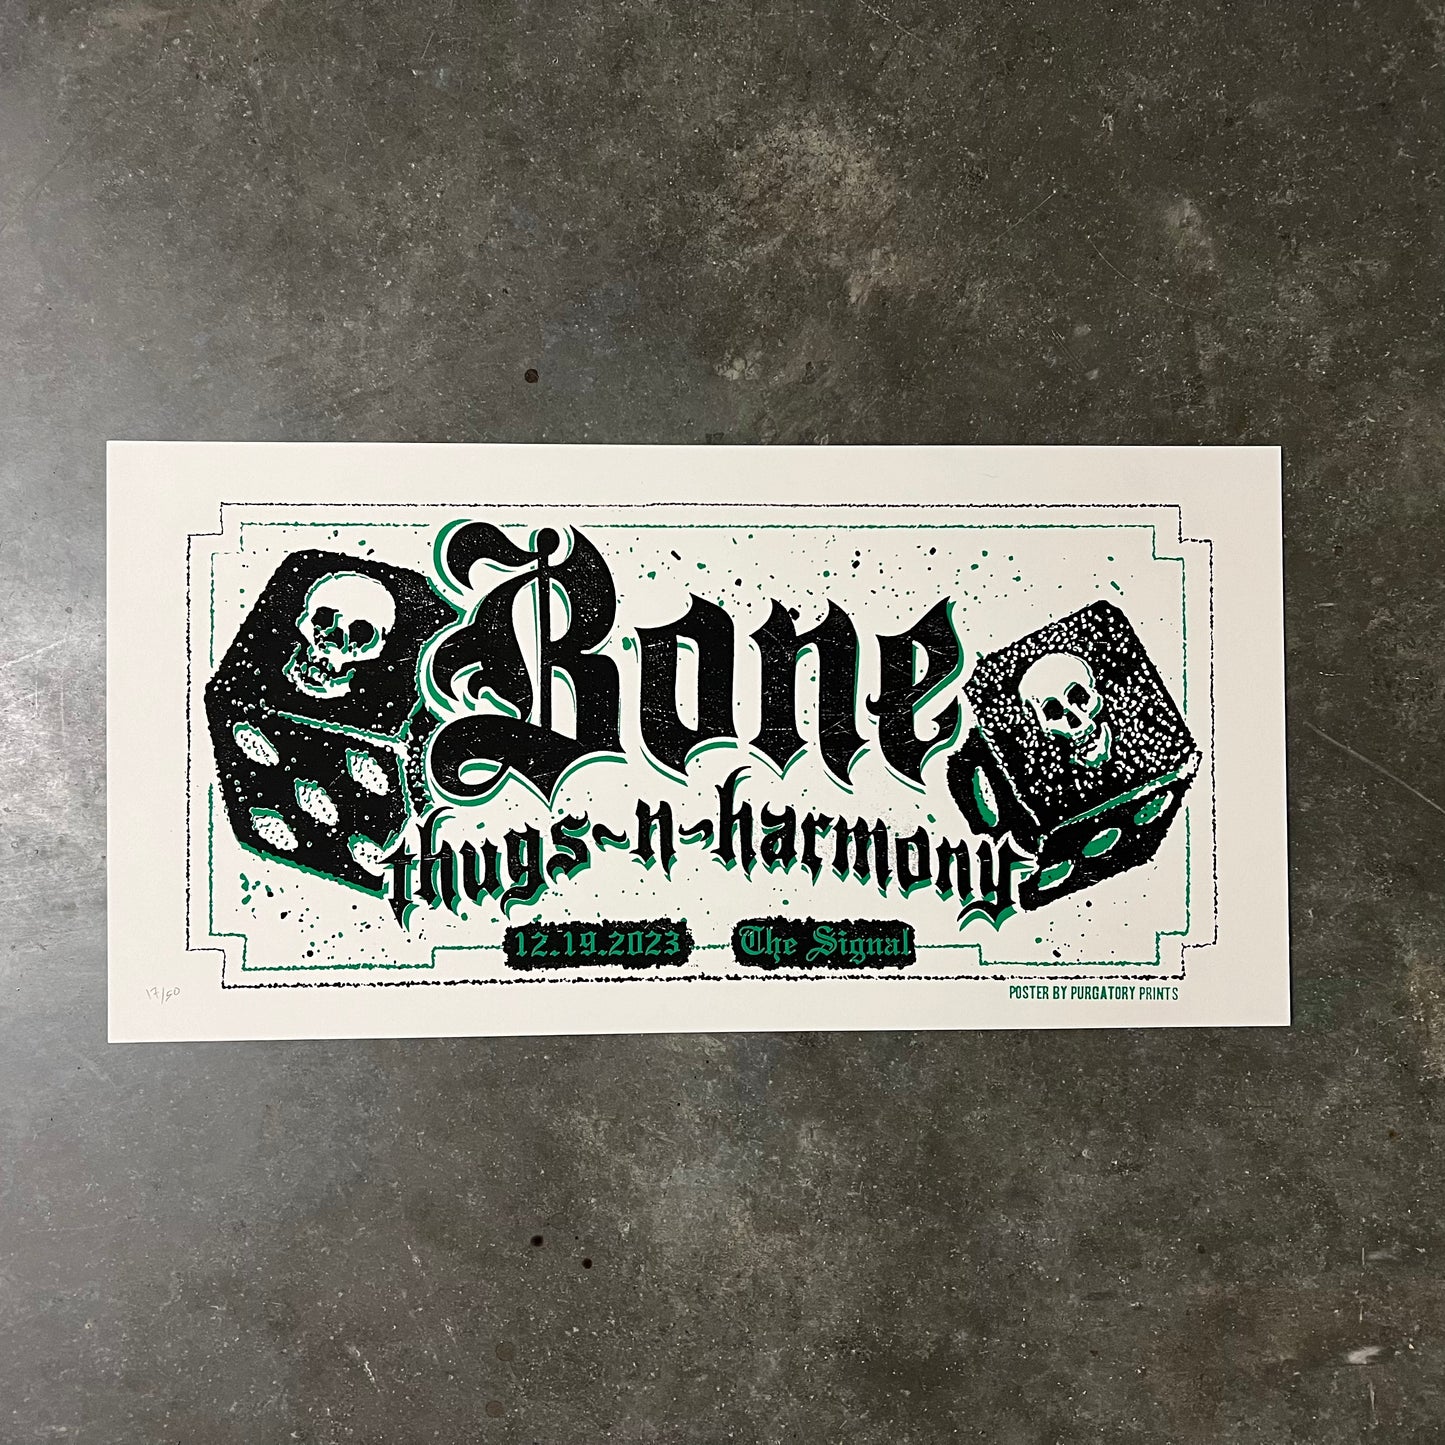 Bone Thugs-N-Harmony at The Signal Poster 12.19.23